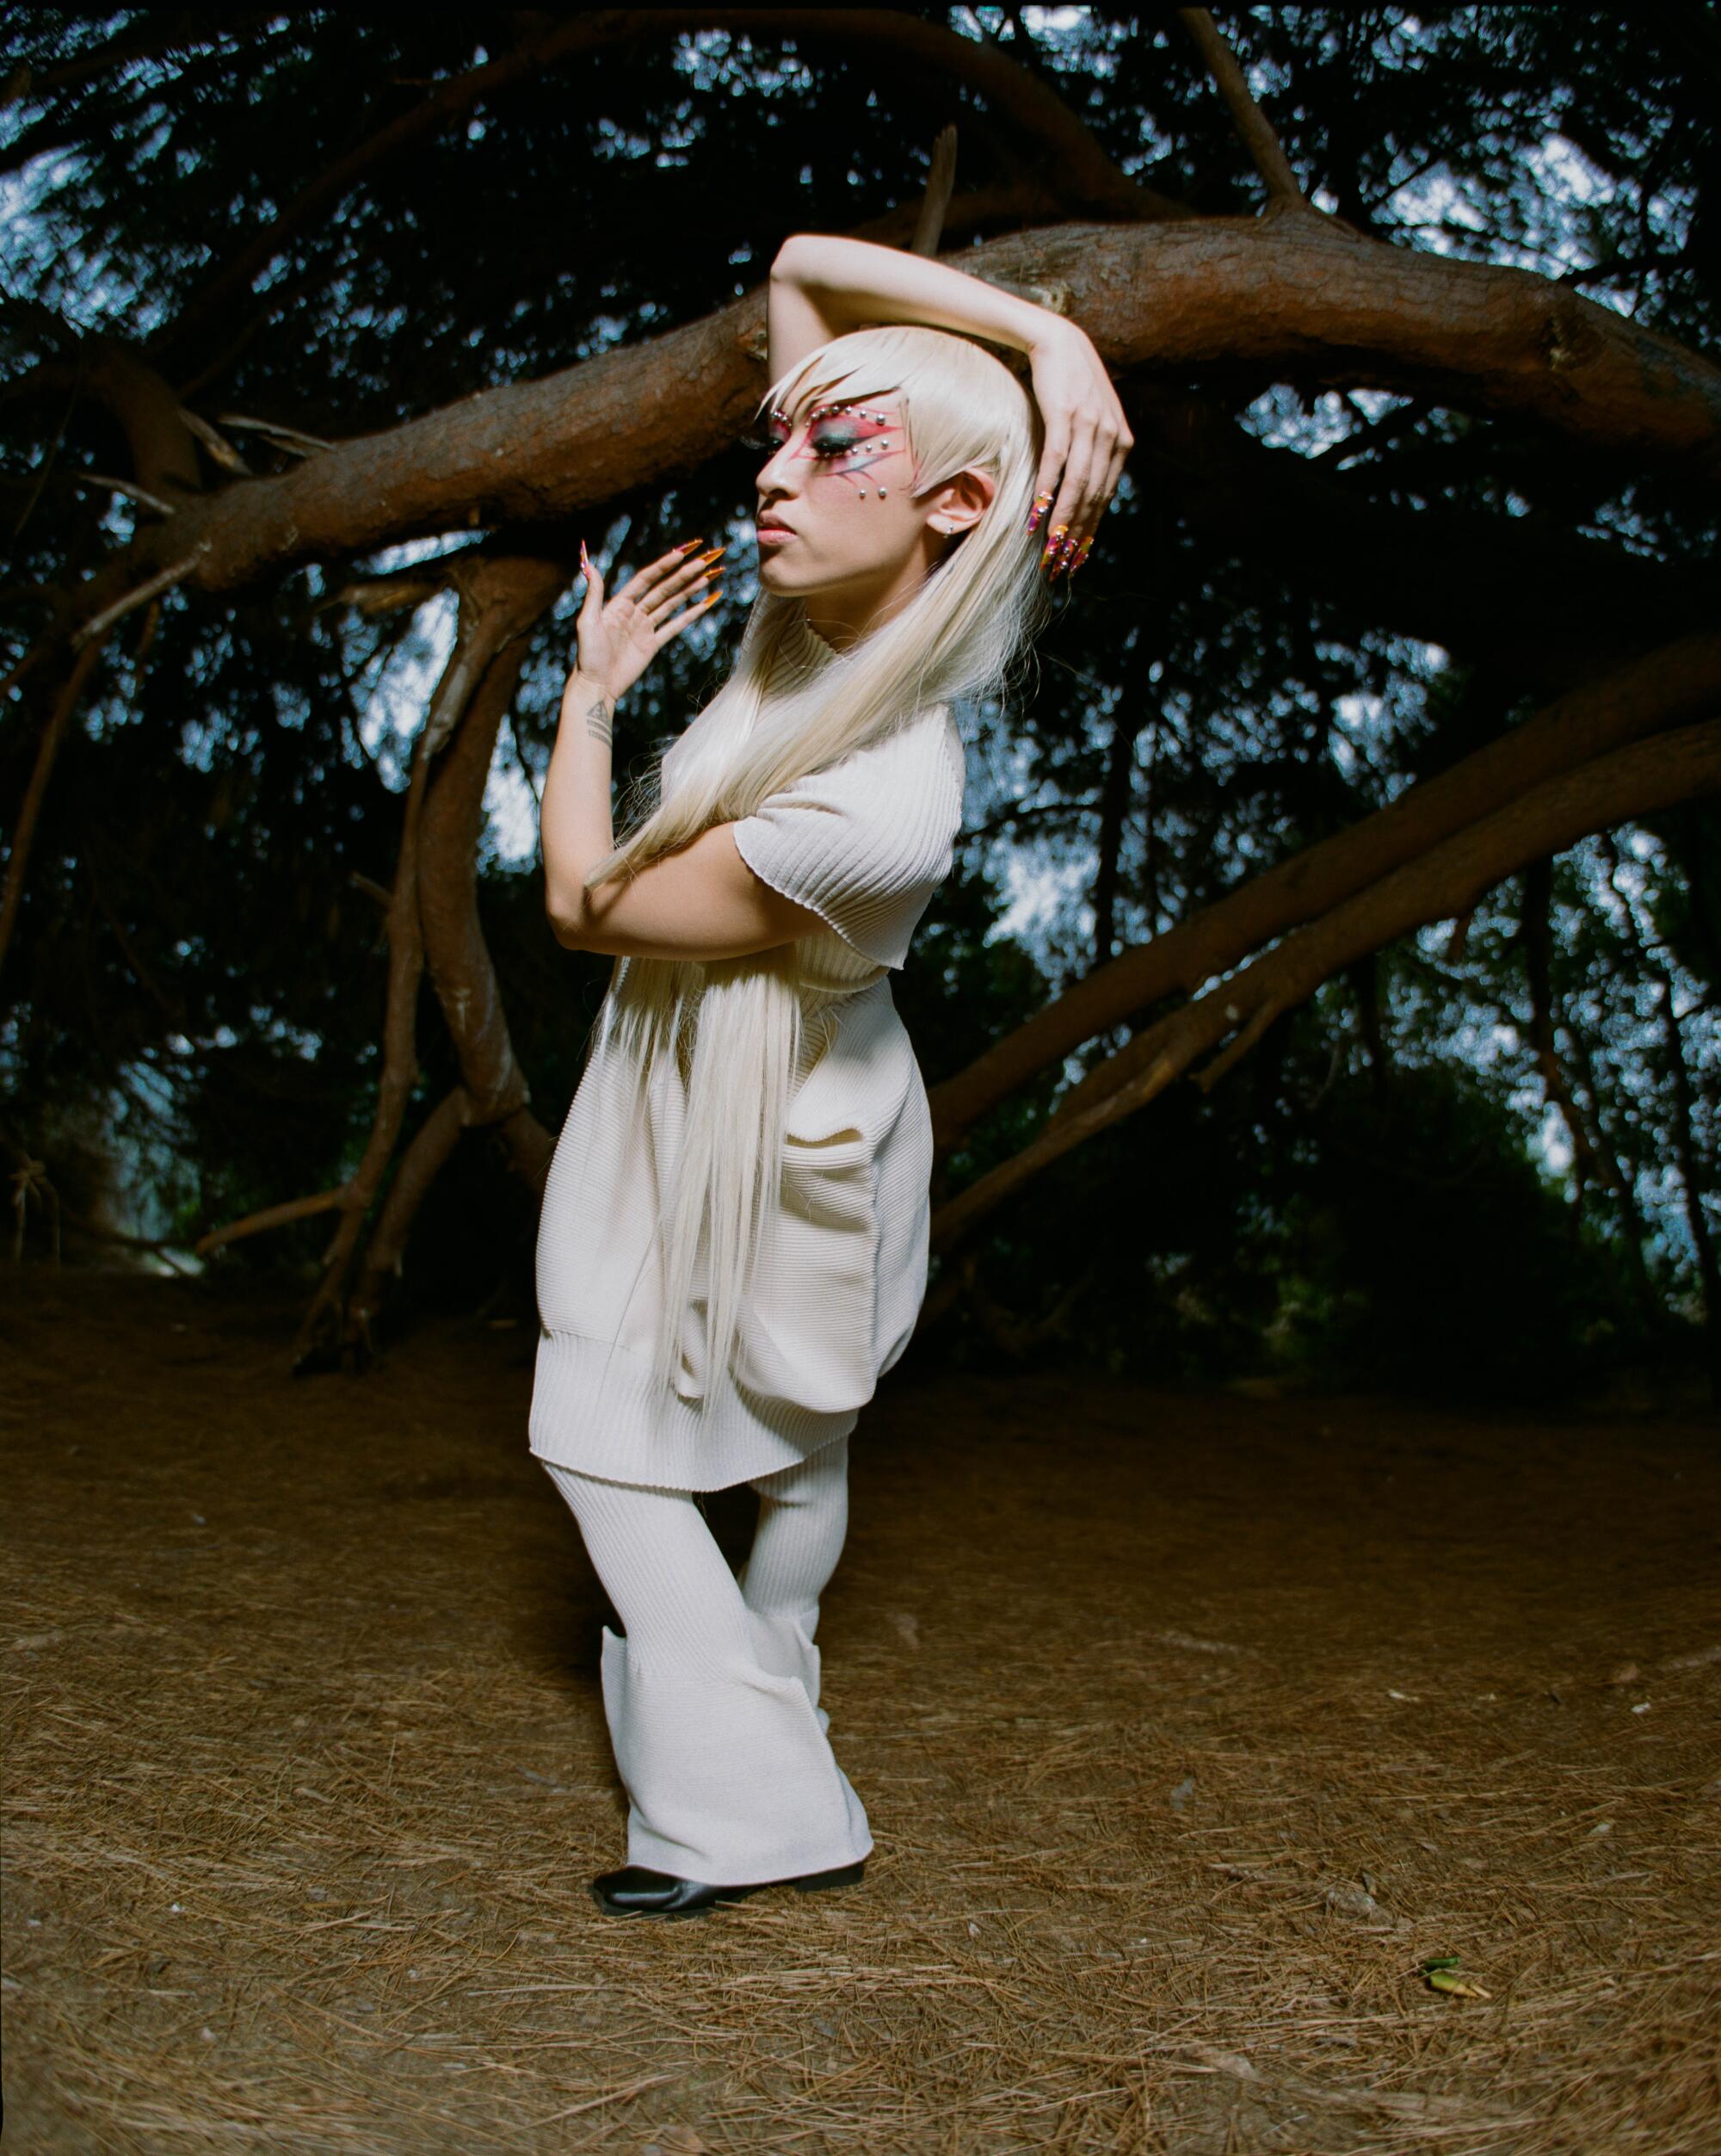 A person with long white-blond hair wraps their arms around their head outside in a white Issey Miyake outfit.